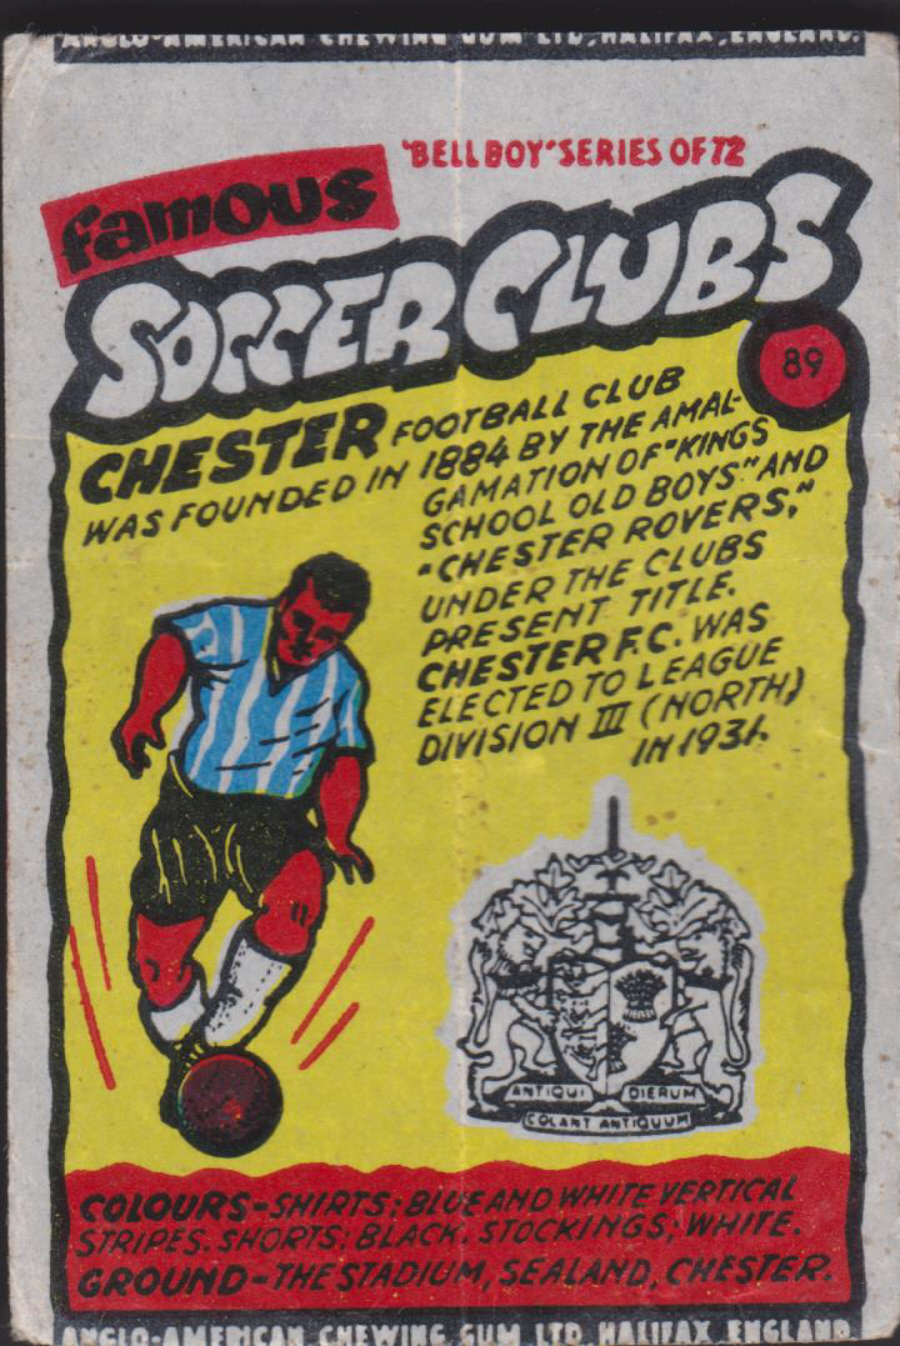 Anglo-American-Chewing-Gum-Wax-Wrapper-Famous-Soccer-Clubs-No-89 - Chester Football Club